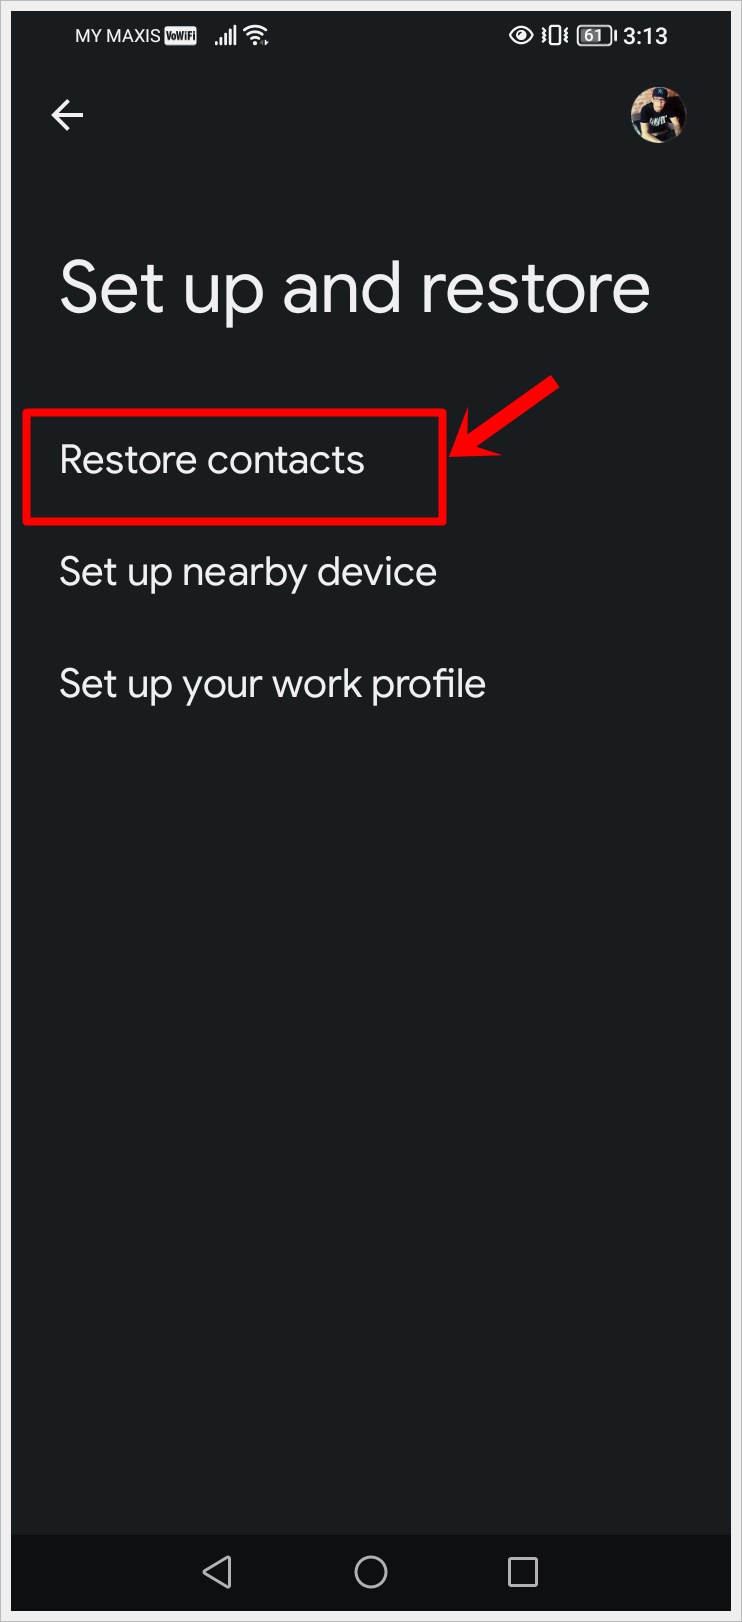 This is a screenshot from an Android phone. It features the Google account's 'Set Up and Restore' page with the 'Restore Contacts' option highlighted.